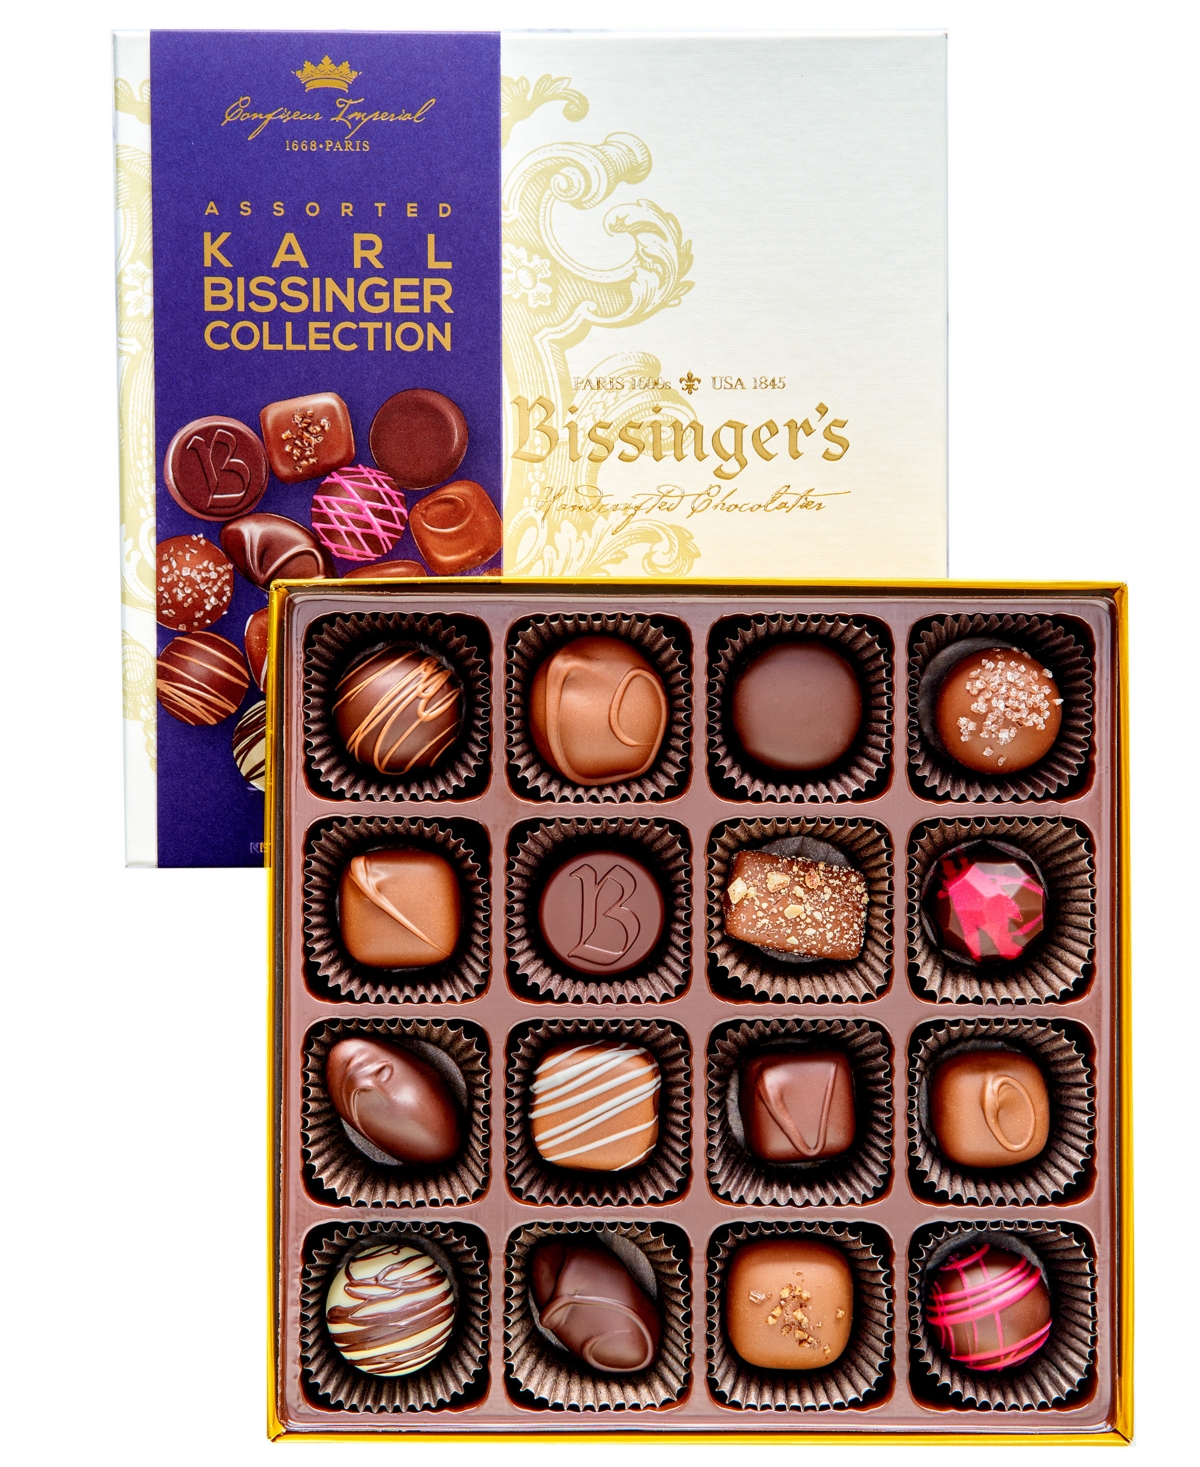 Bissinger's Handcrafted Chocolate Karl Bissinger, 17 Piece Assorted Gift Box In No Color